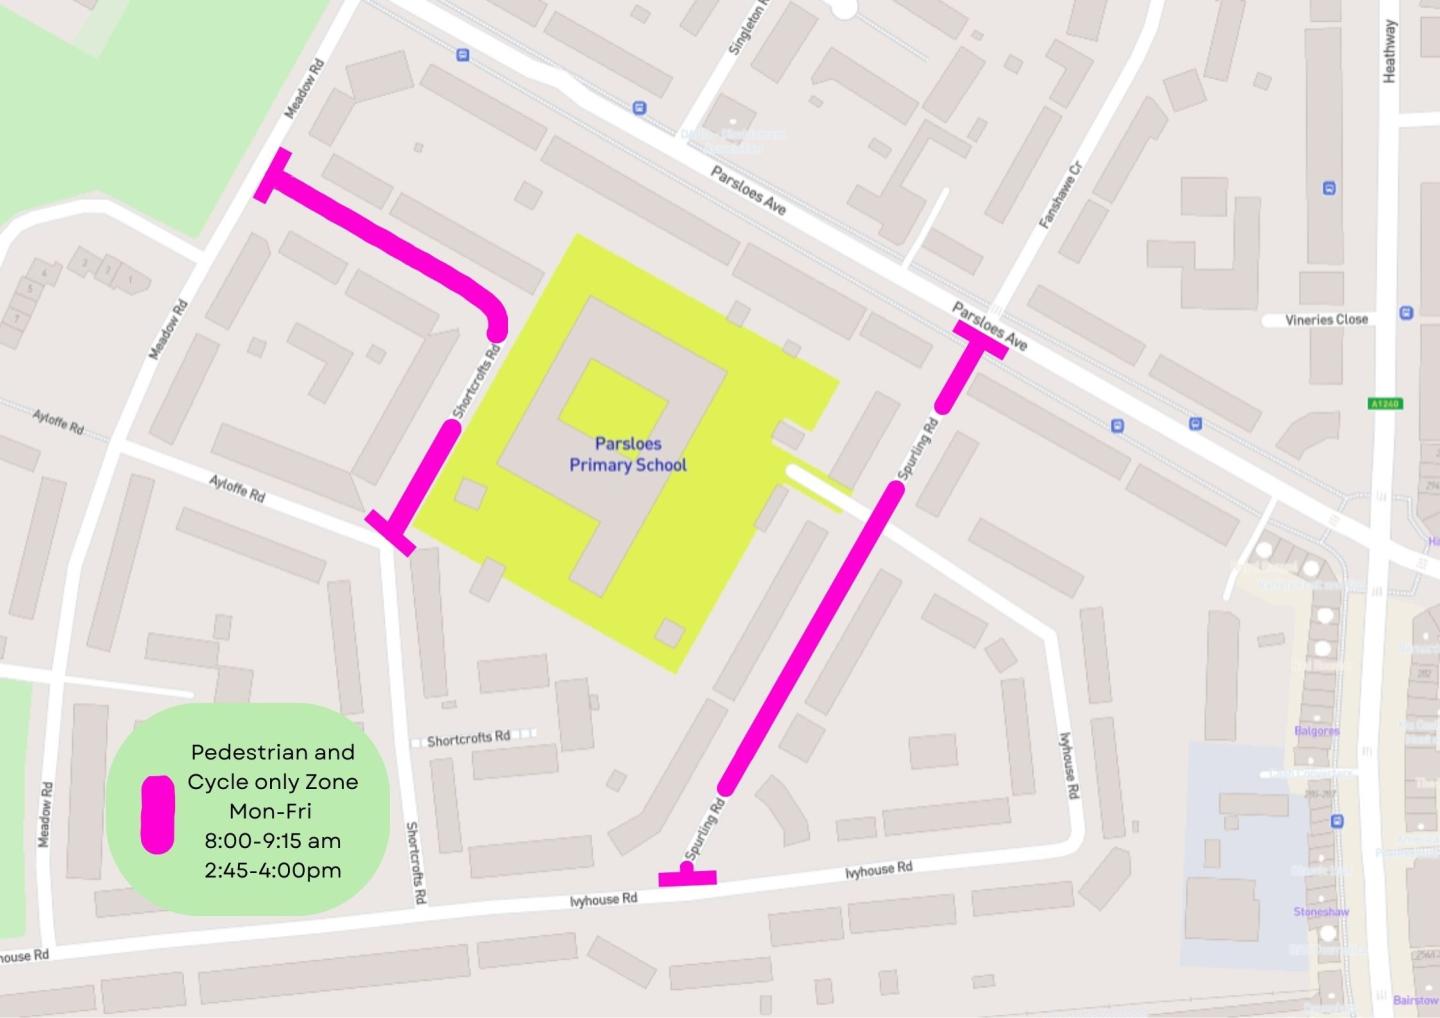 A map showing the location of the School Street for Parsloes Primary School